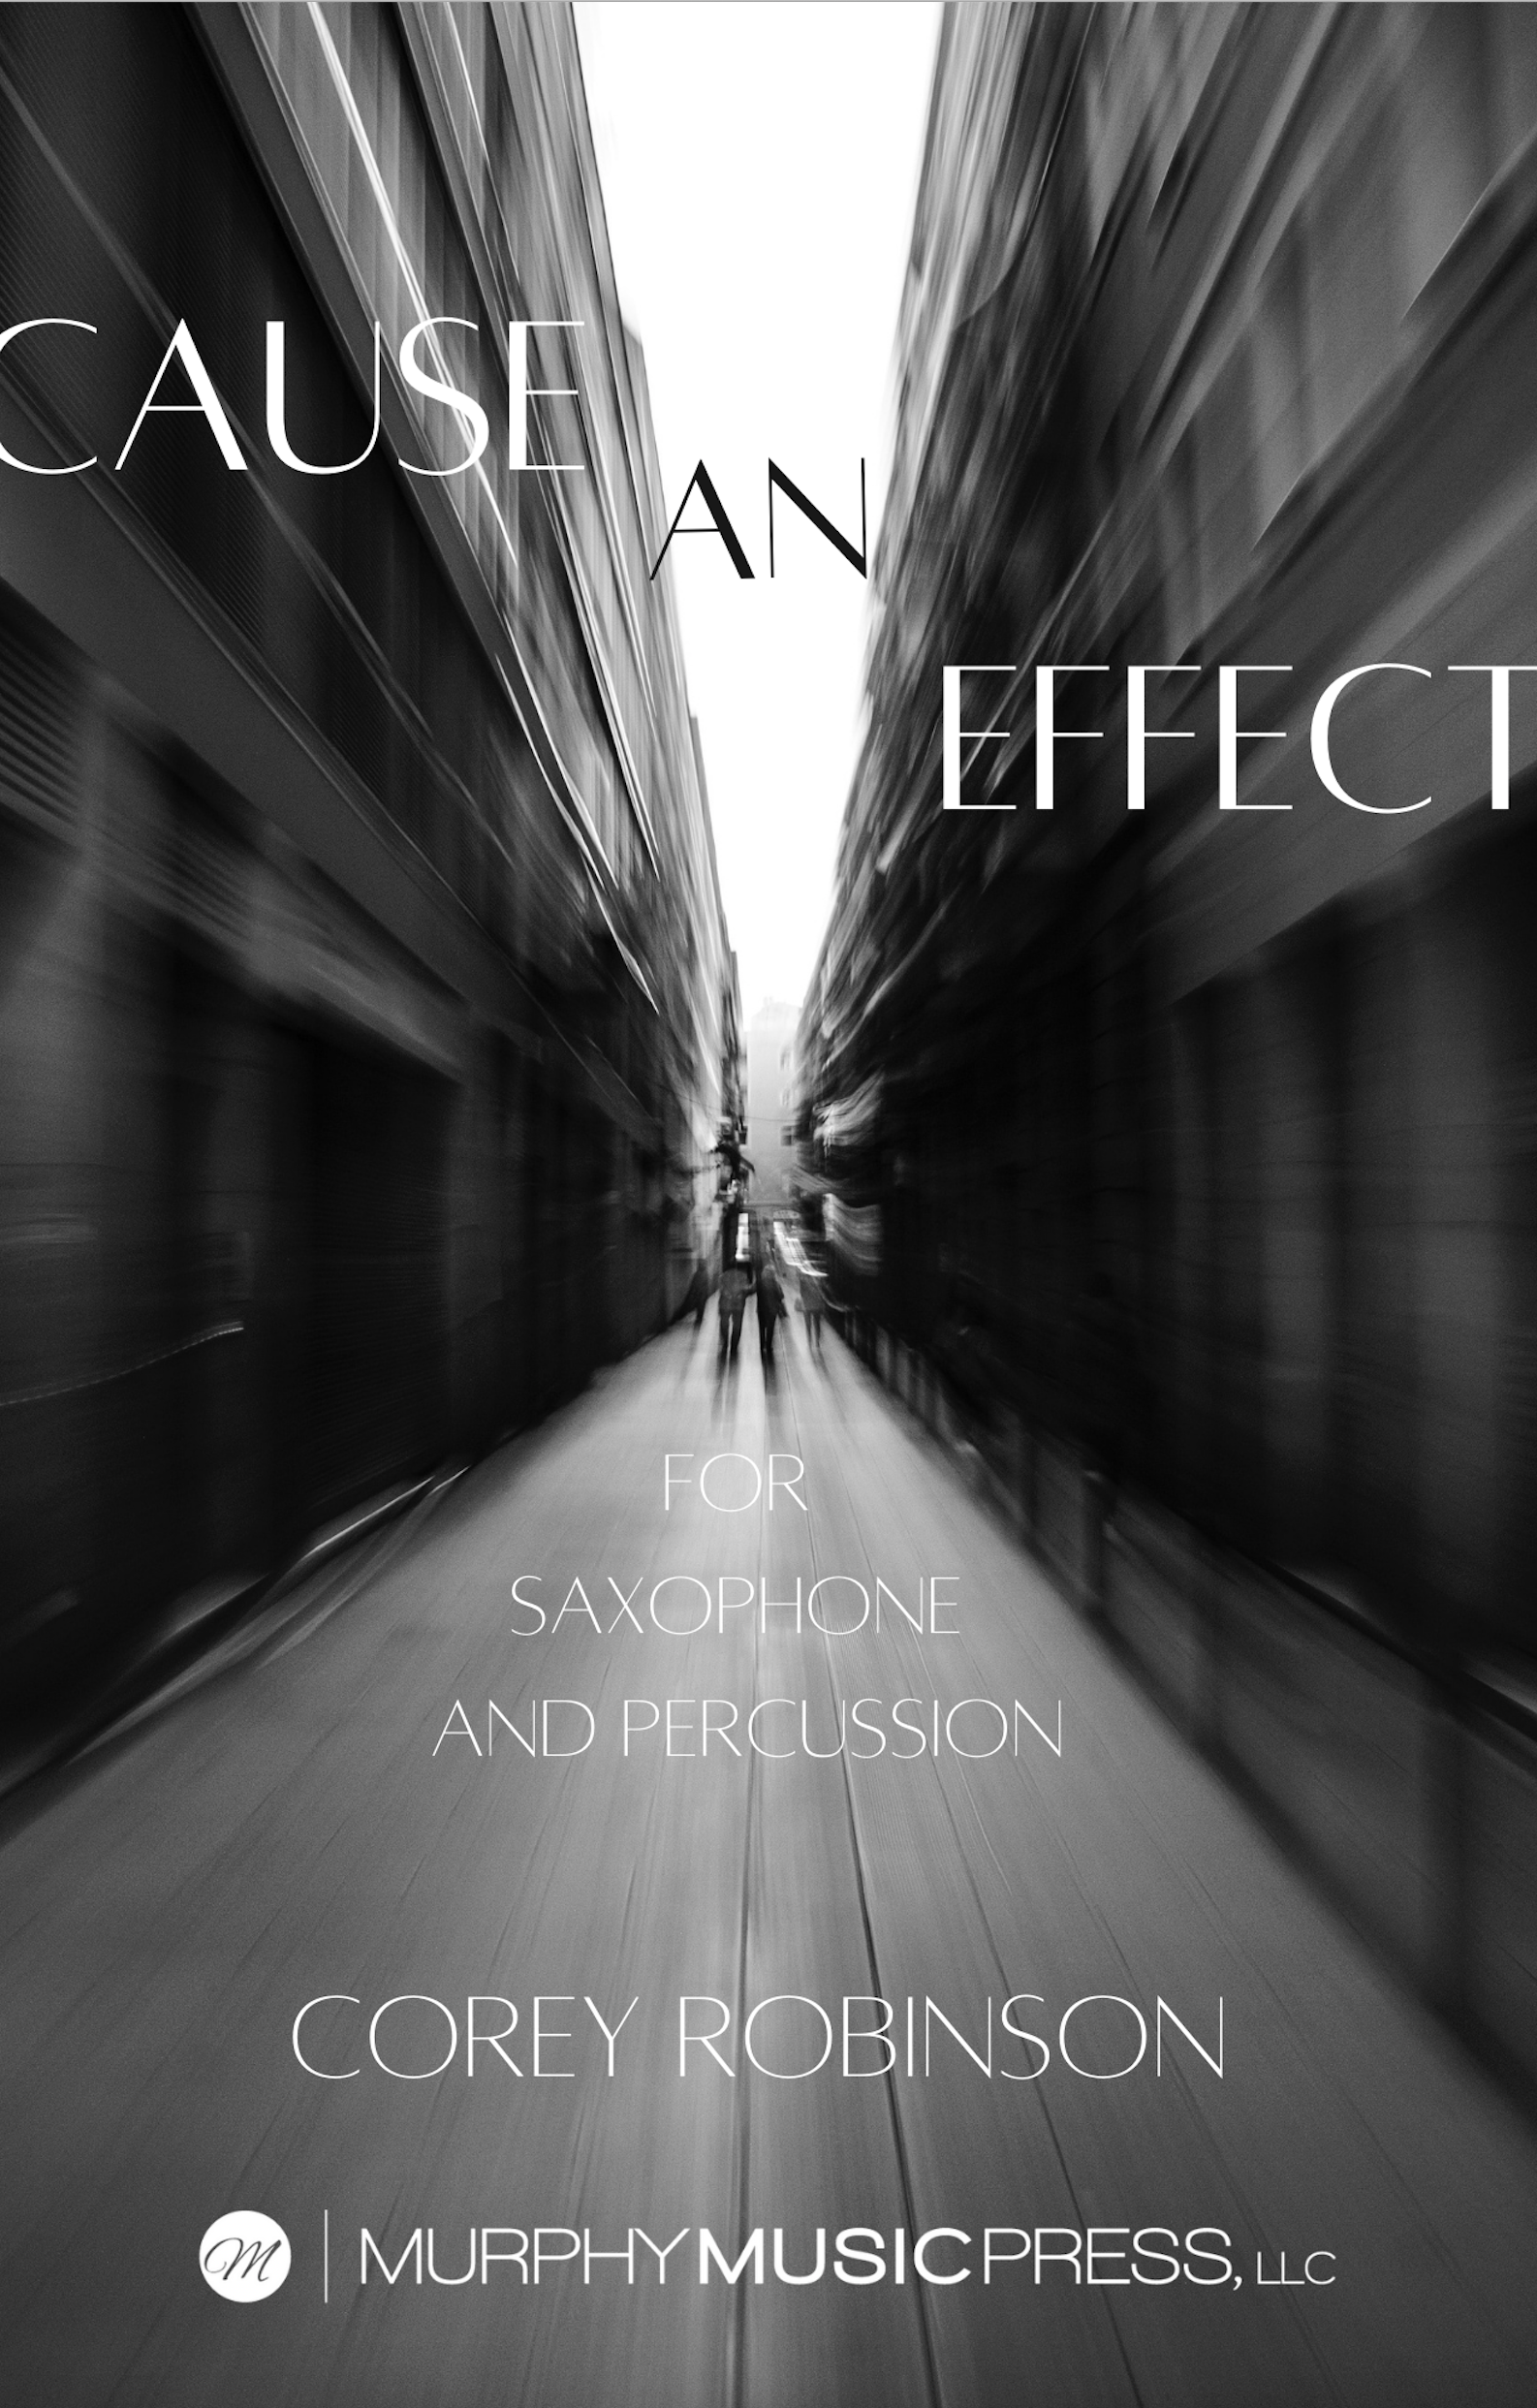 Cause An Effect by Corey Robinson